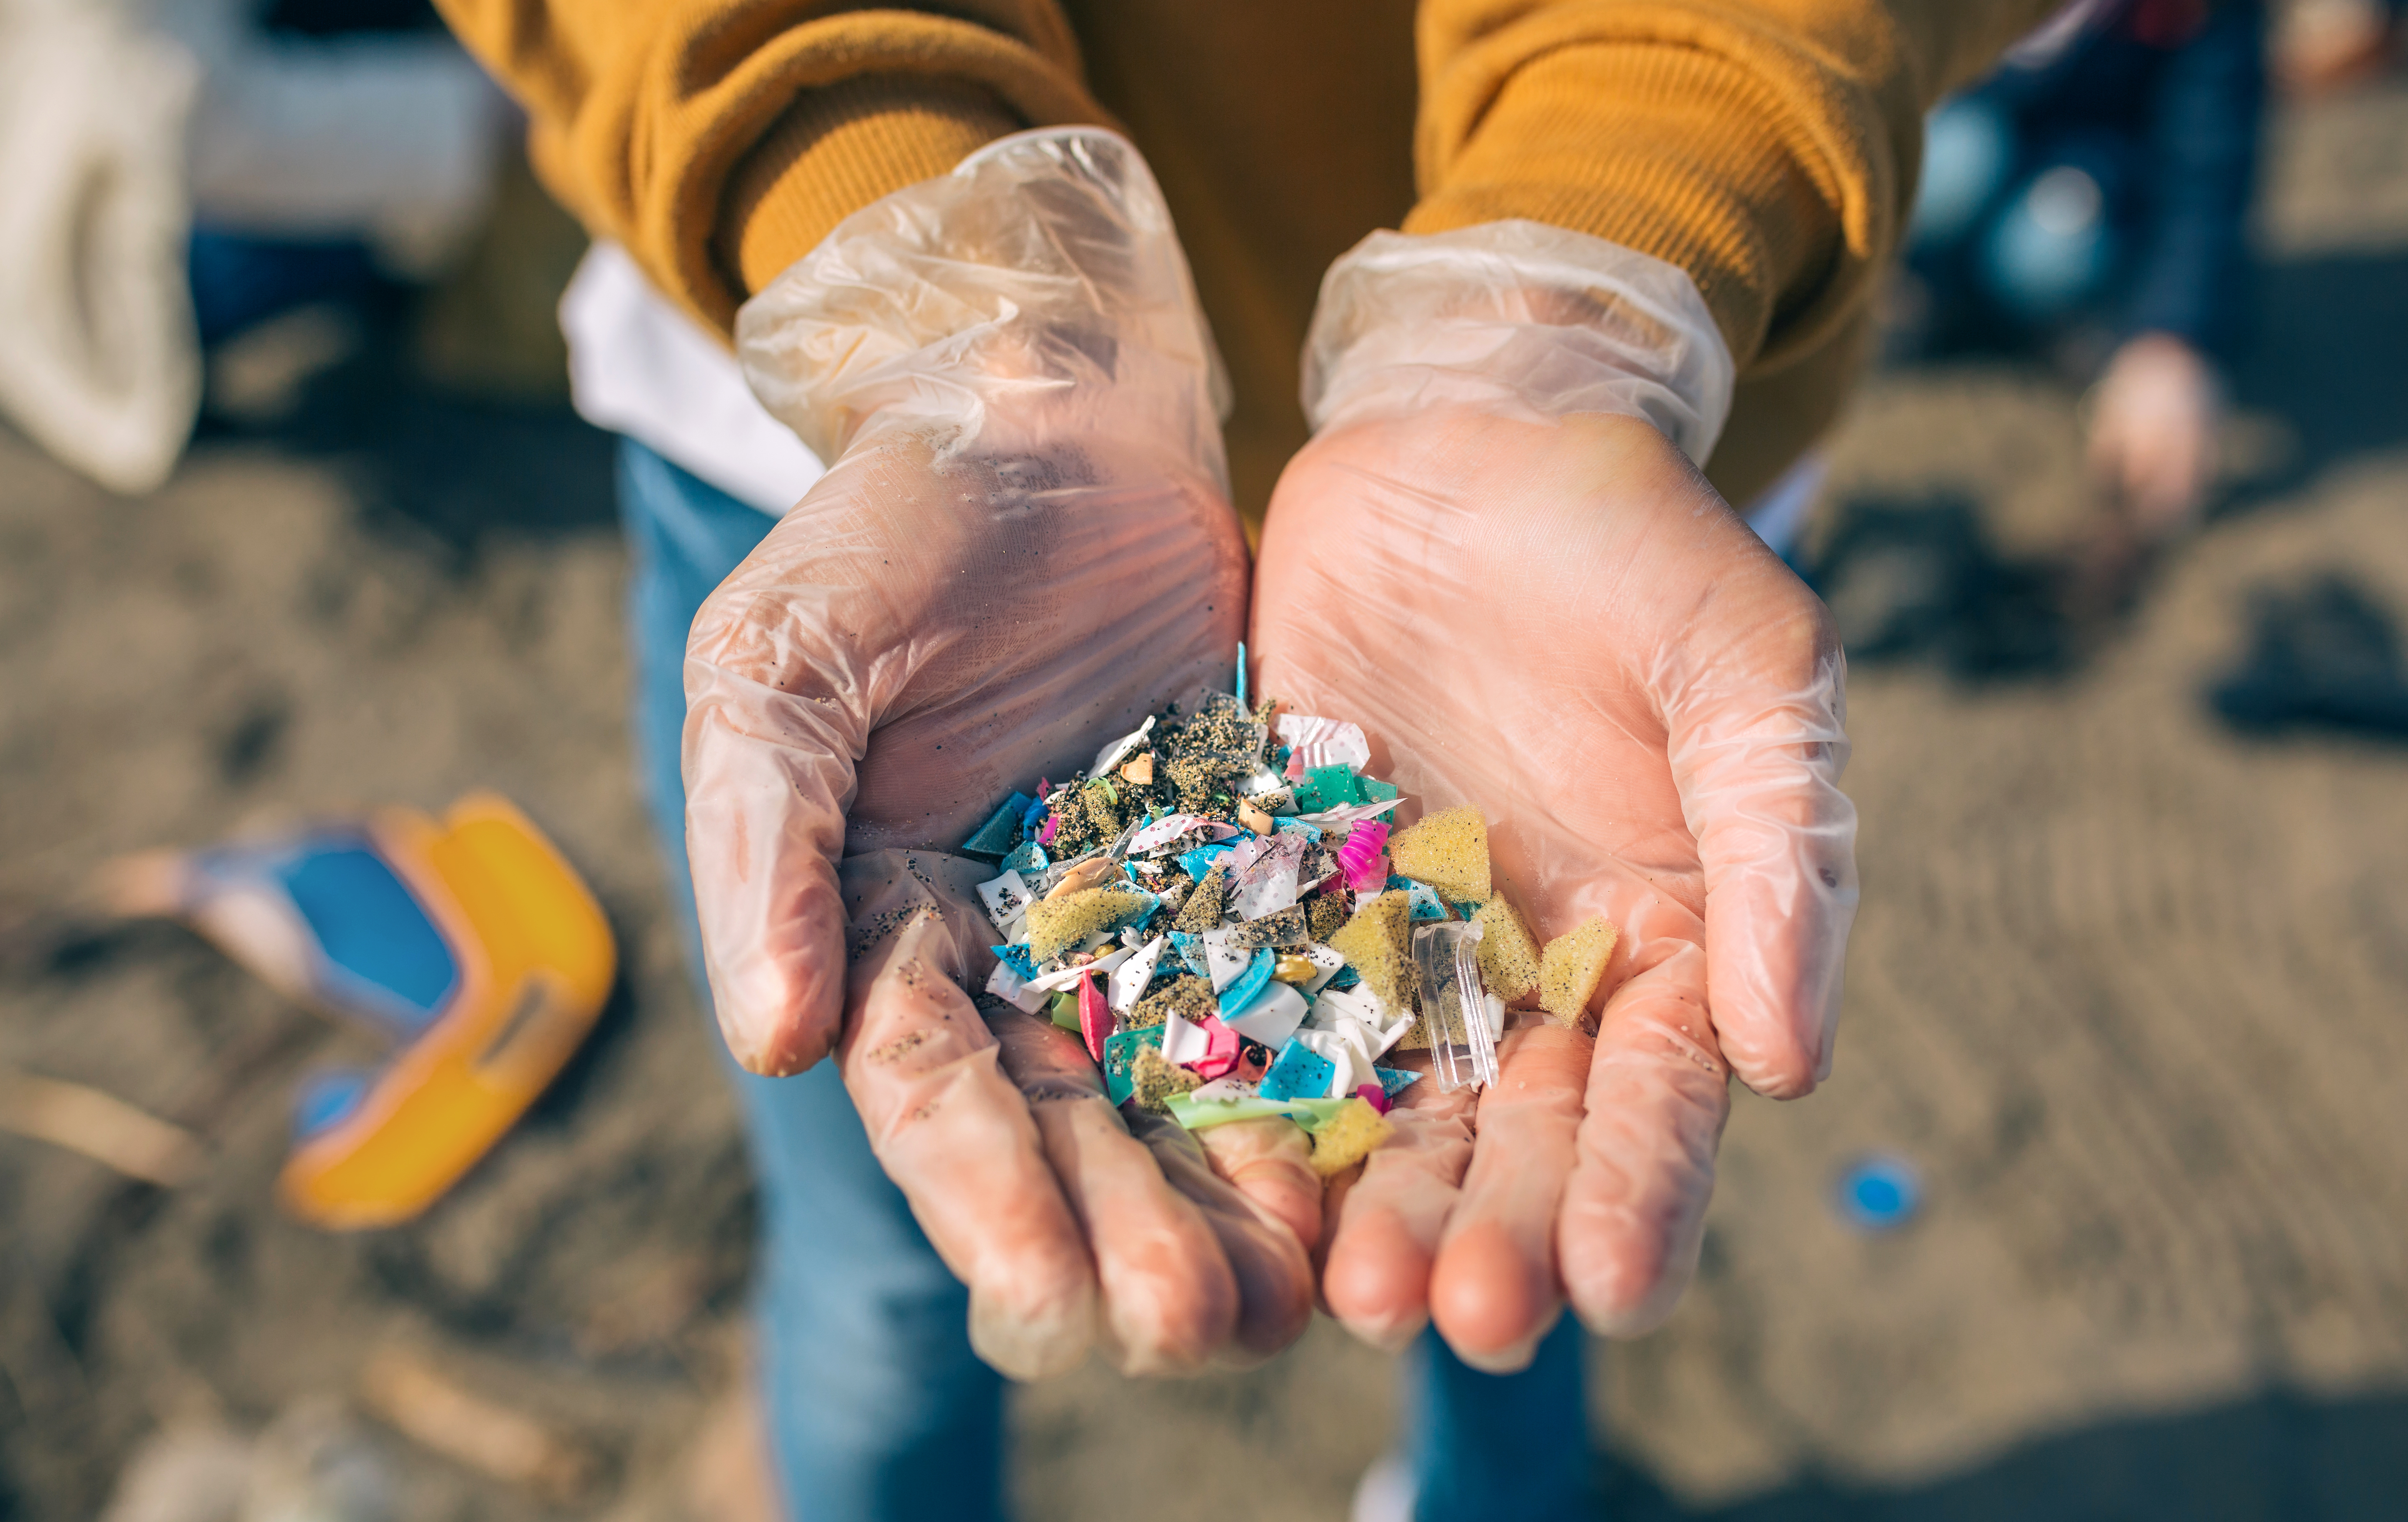 Hands filled with microplastic particles found at the beach.